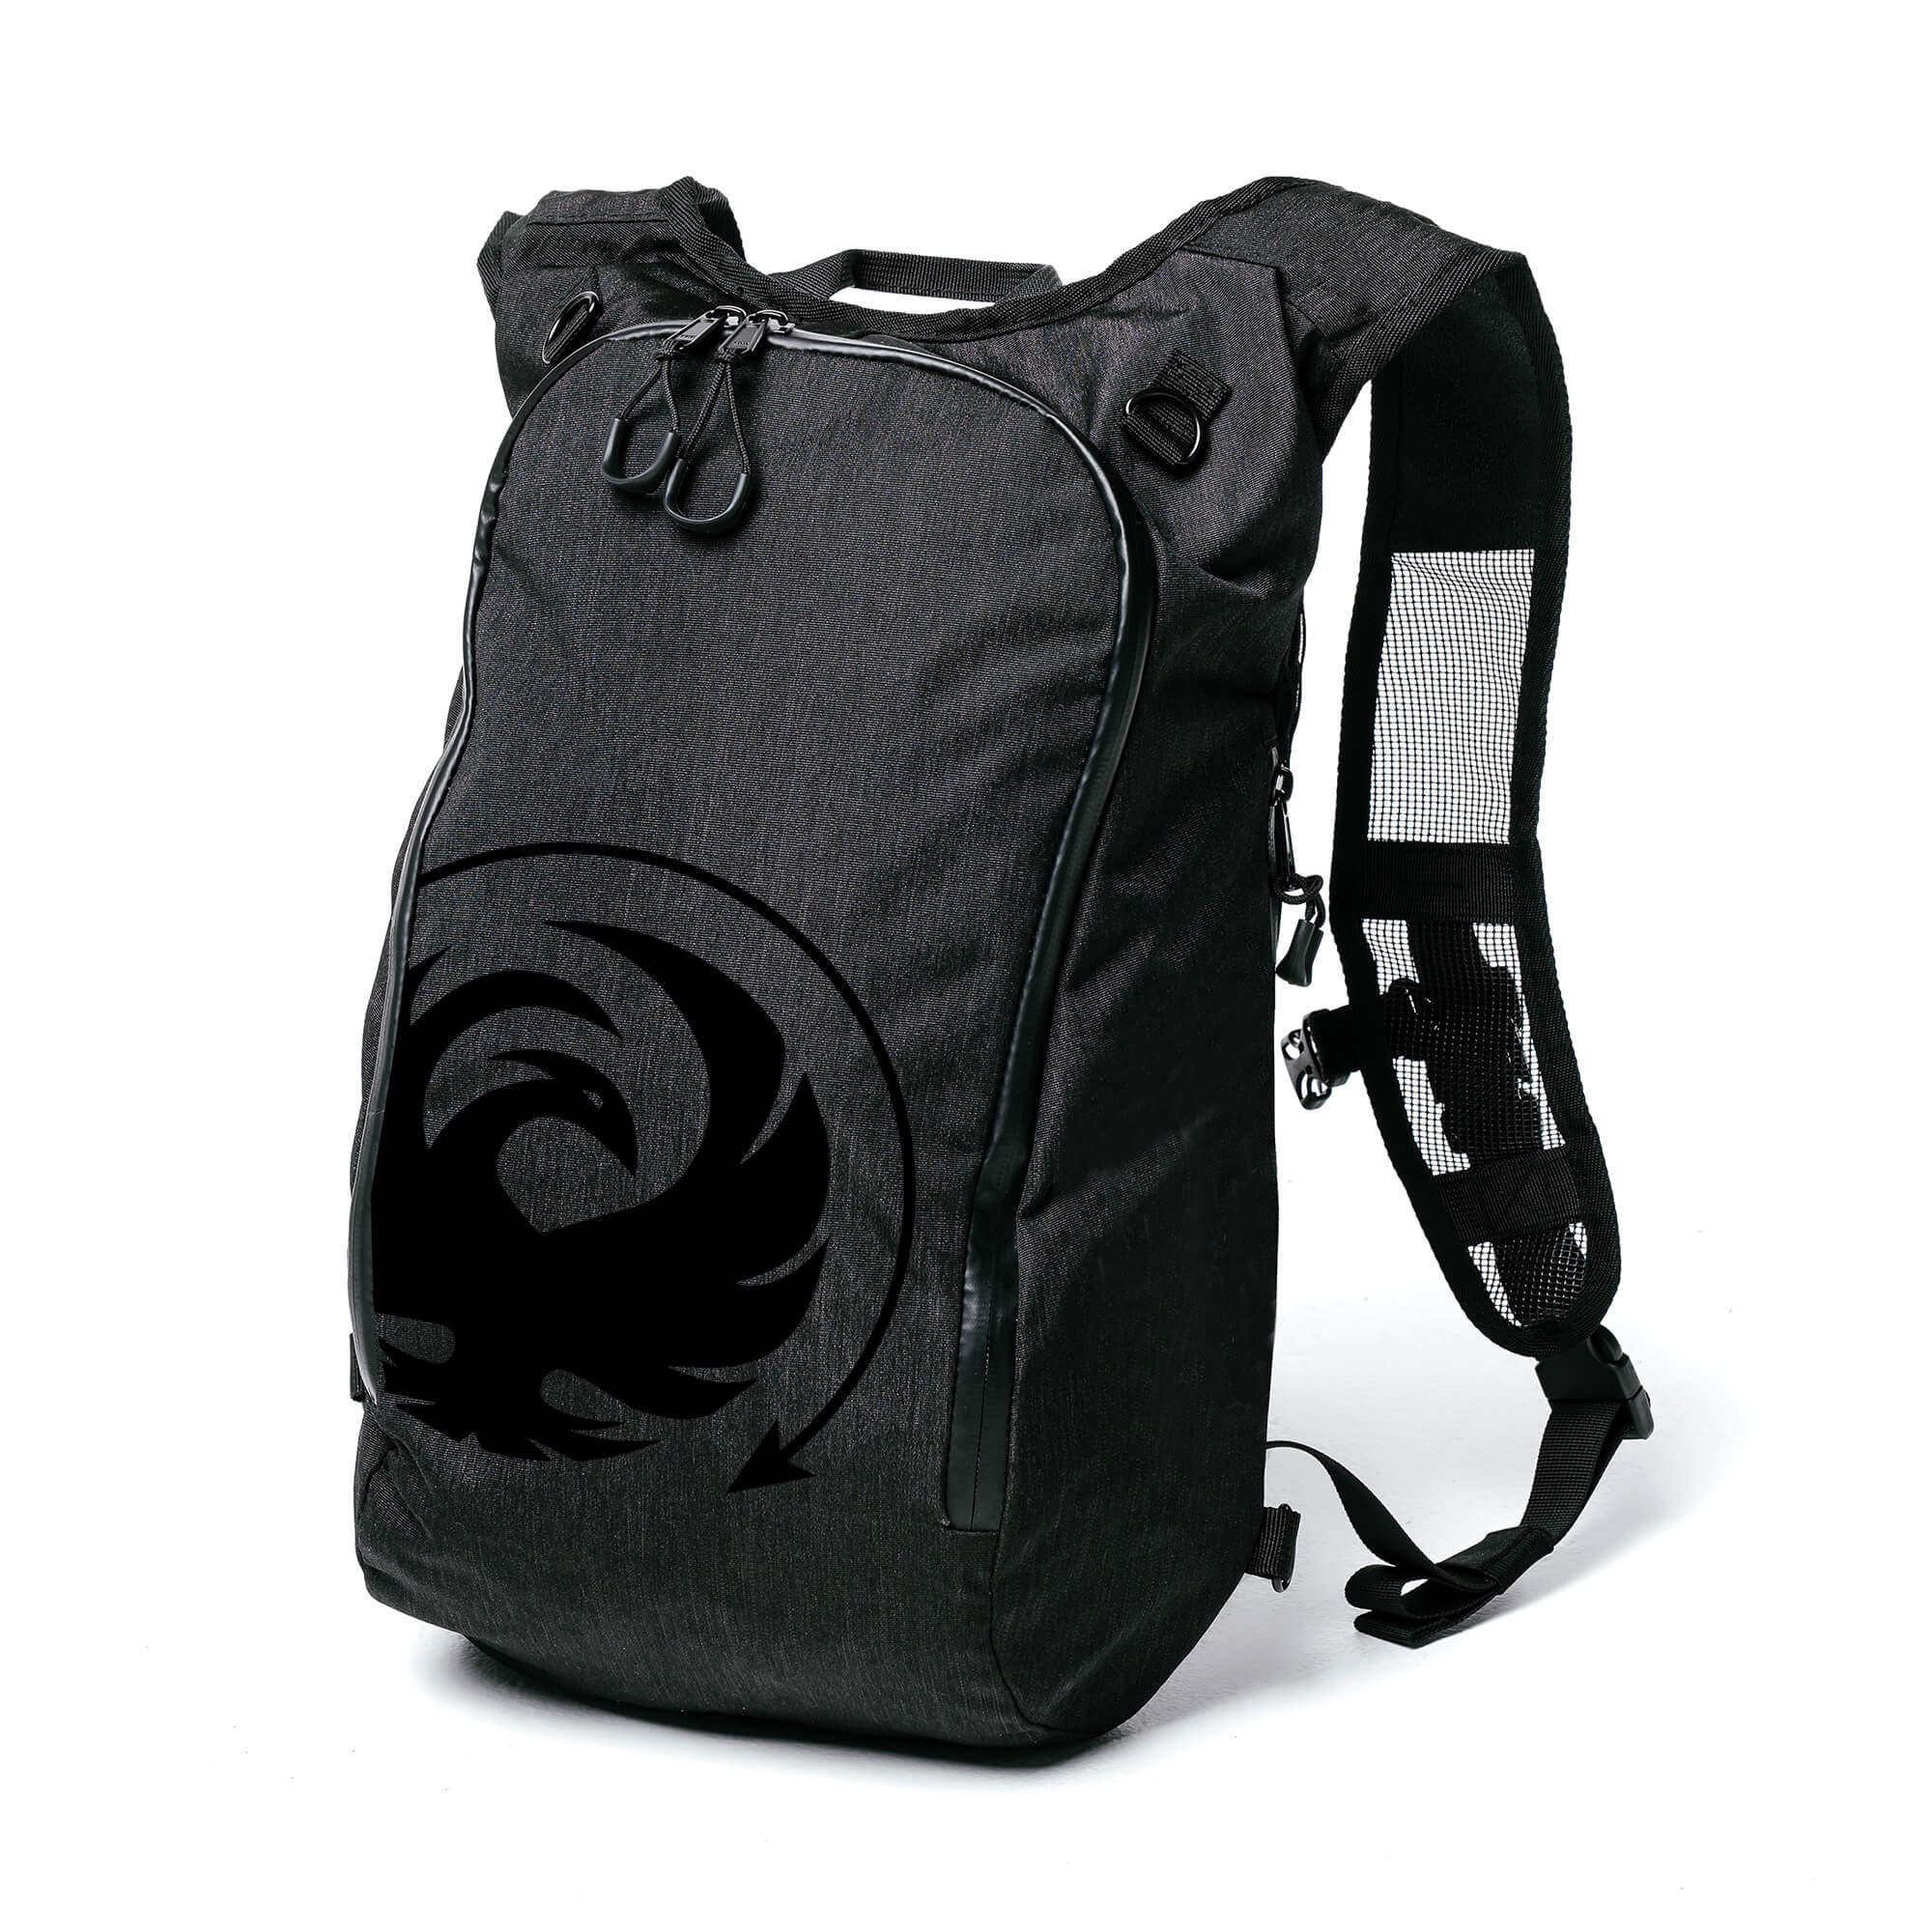 Flying Solo Gear Co | Ashvault X Backpack 15L - No - Bags & Luggage - Peak Moto